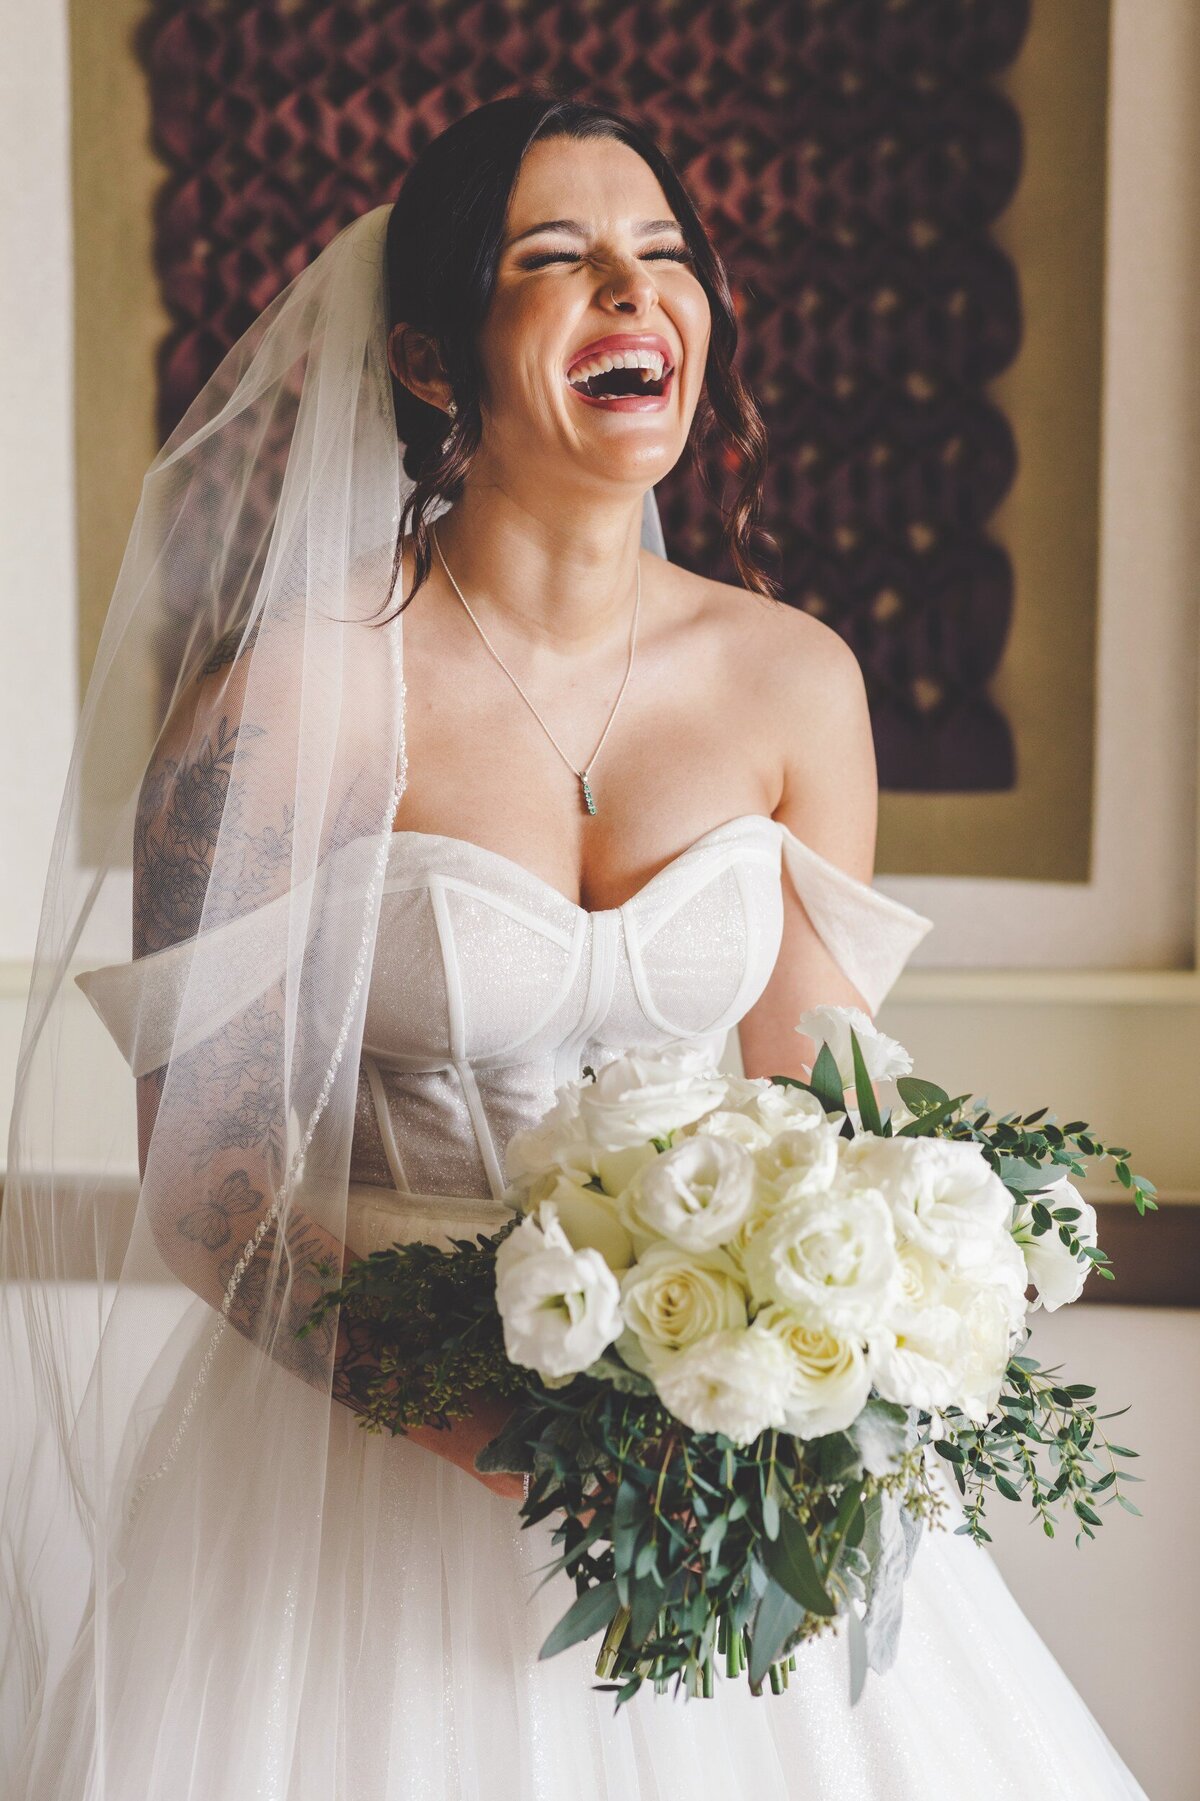 Bride laughing before wedding in Cancun